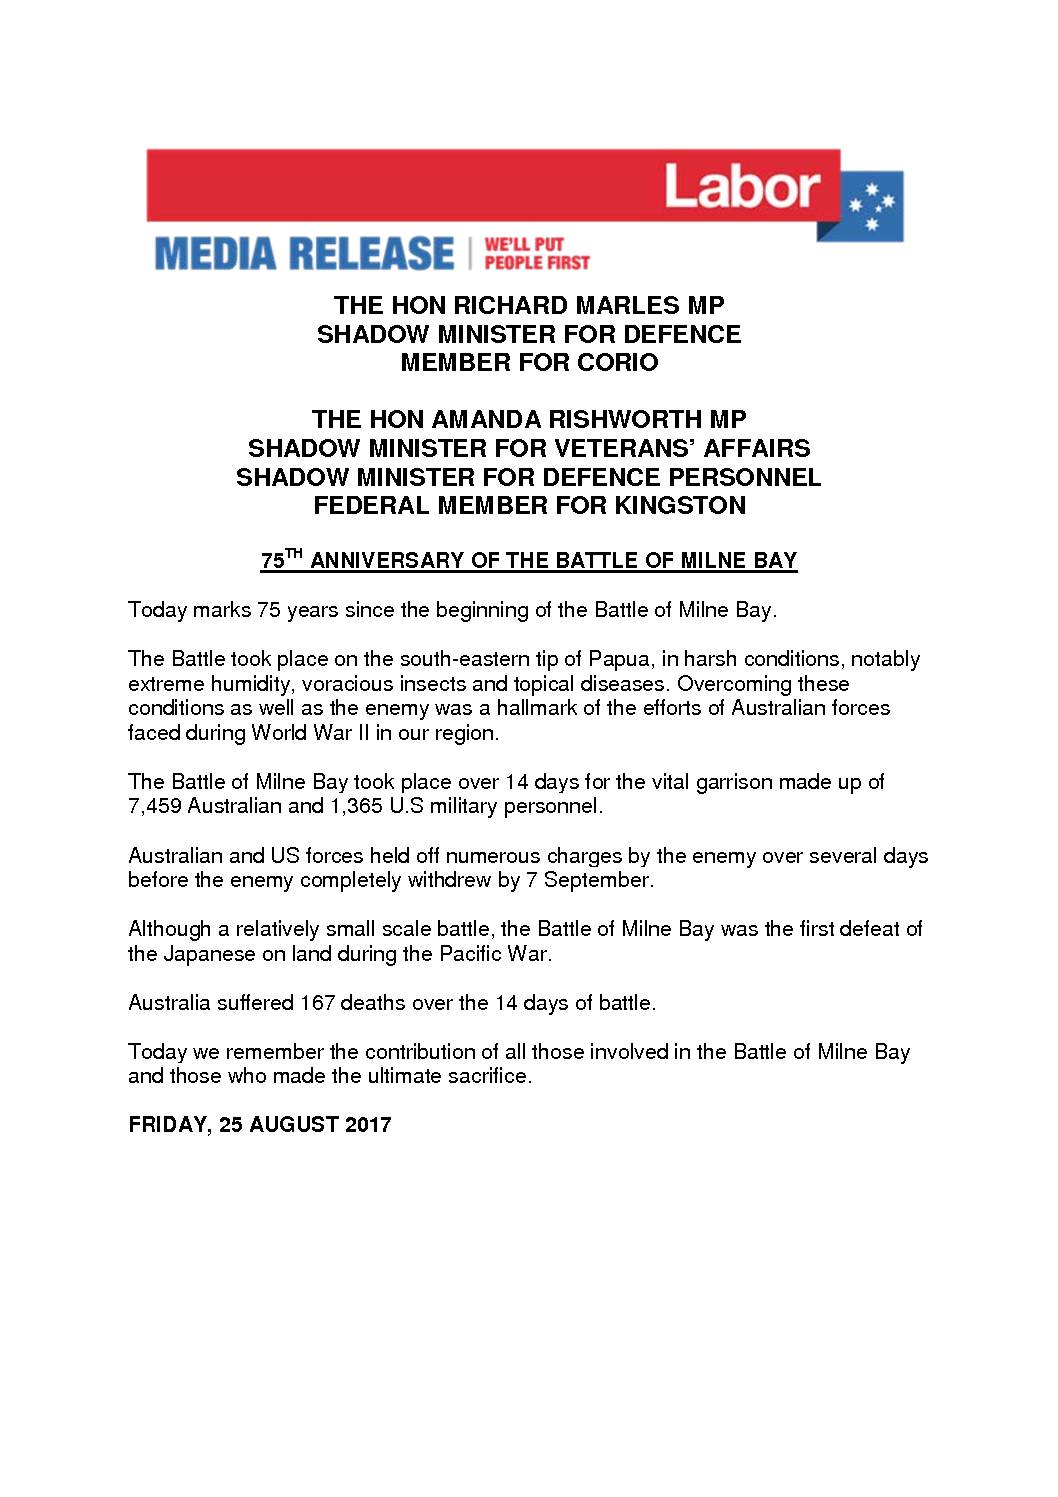 17-08-25-media-release-75th-anniversary-of-the-battle-of-milne-baydocx